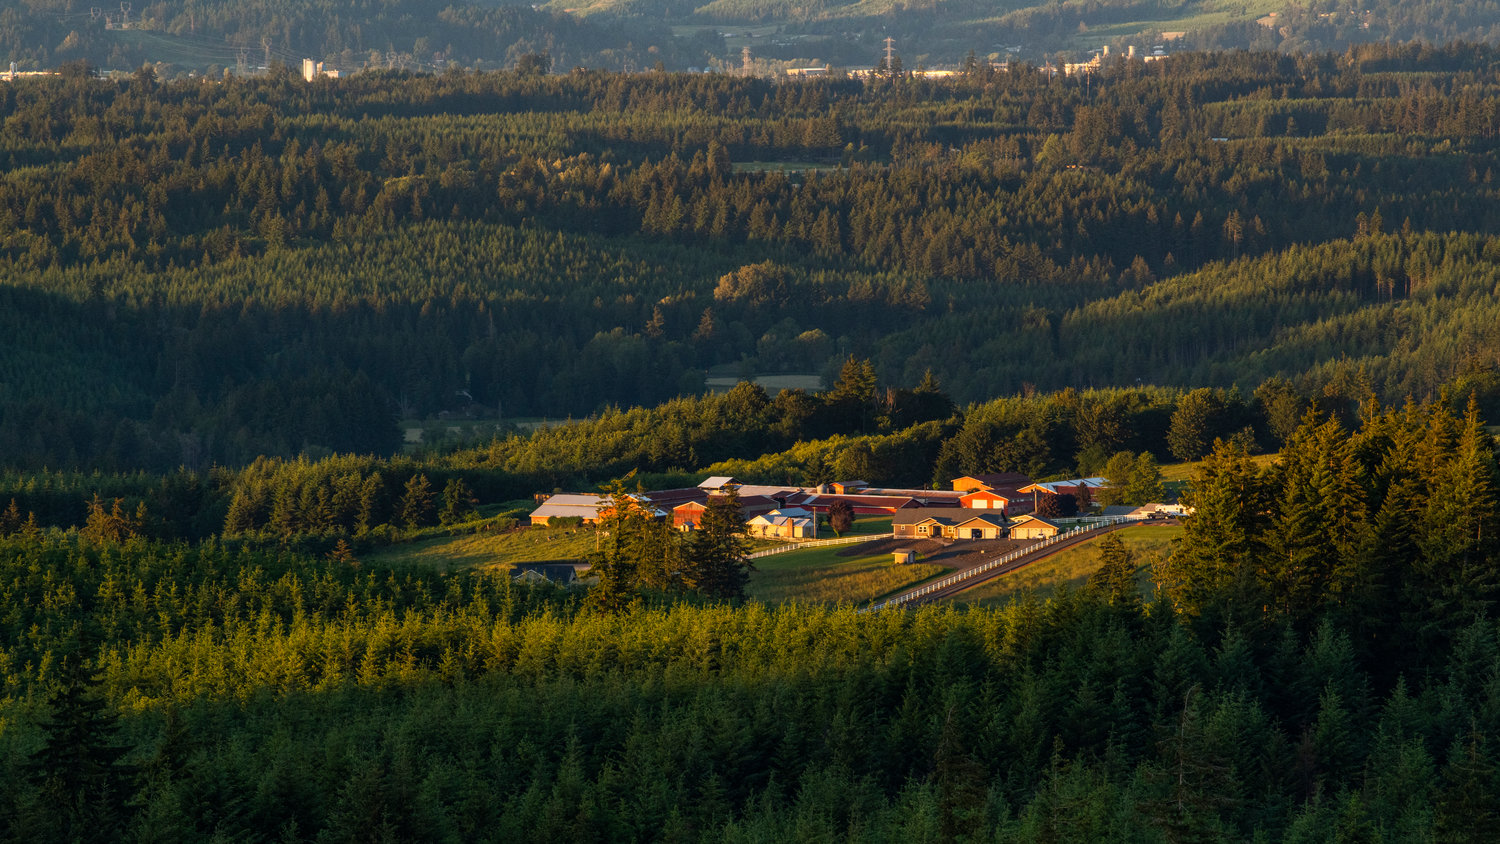 Buildings are pictured in the sun from Crego Hill in Adna on the longest day of the year as the sunset draws near.